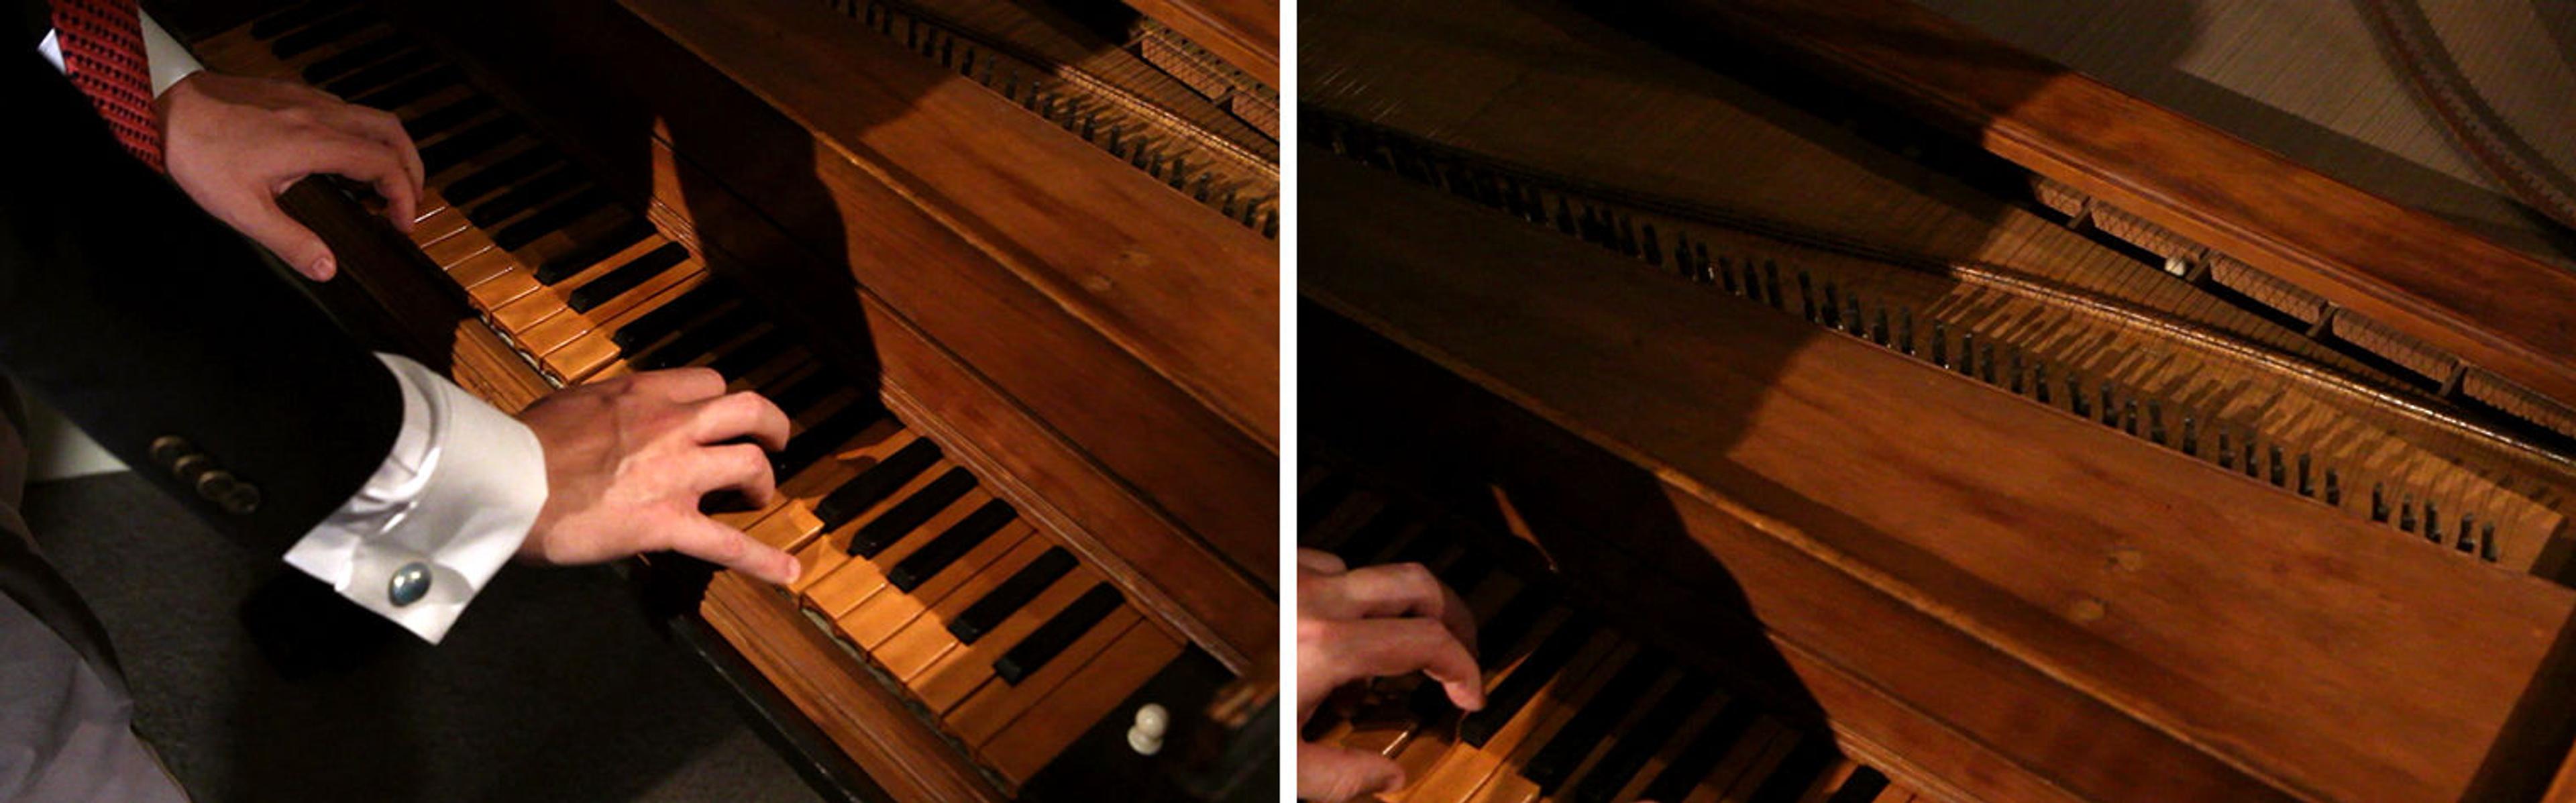 Left: a picture of a man's hands playing the keys of the world's oldest piano by Bartolomeo Cristofori. Right: a closer view of a hammer hitting the strings inside the piano.